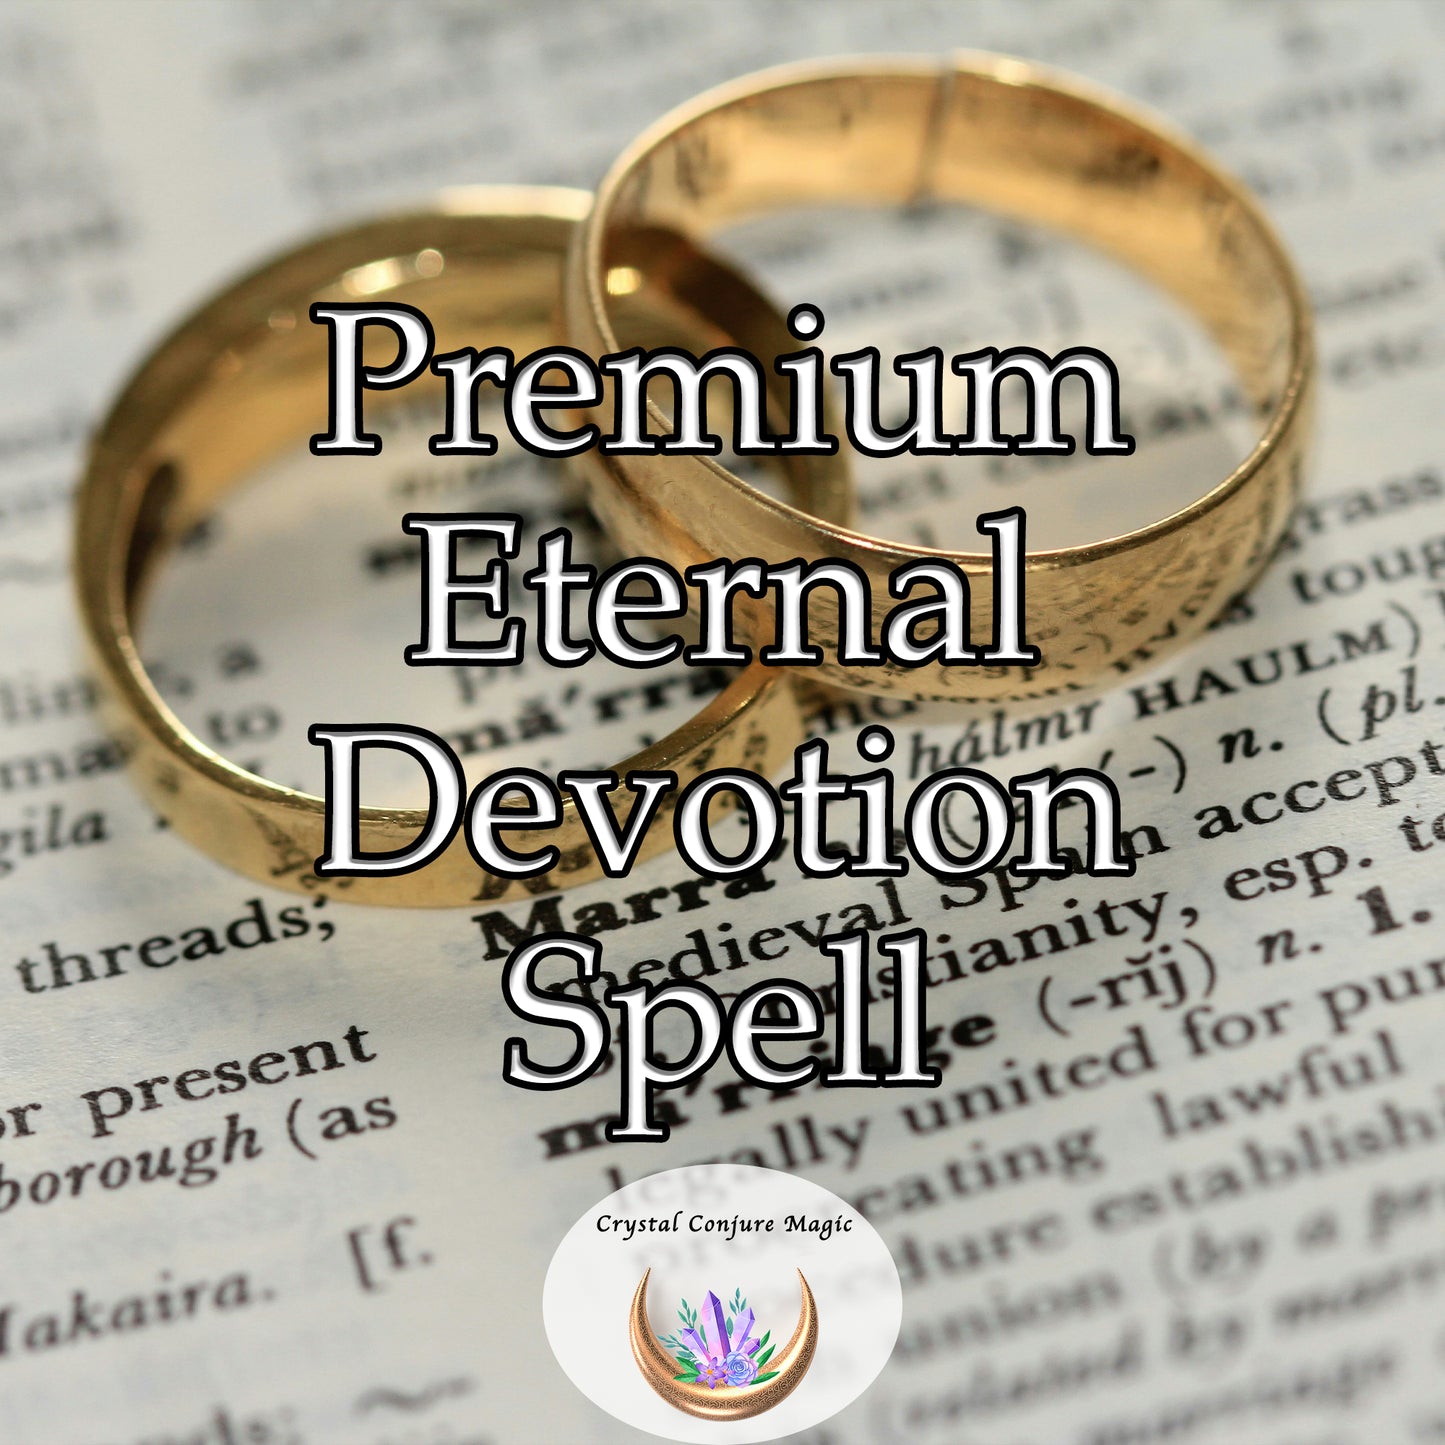 Premium Eternal Devotion Spell - strengthen the connection between your souls, ensuring an enduring union